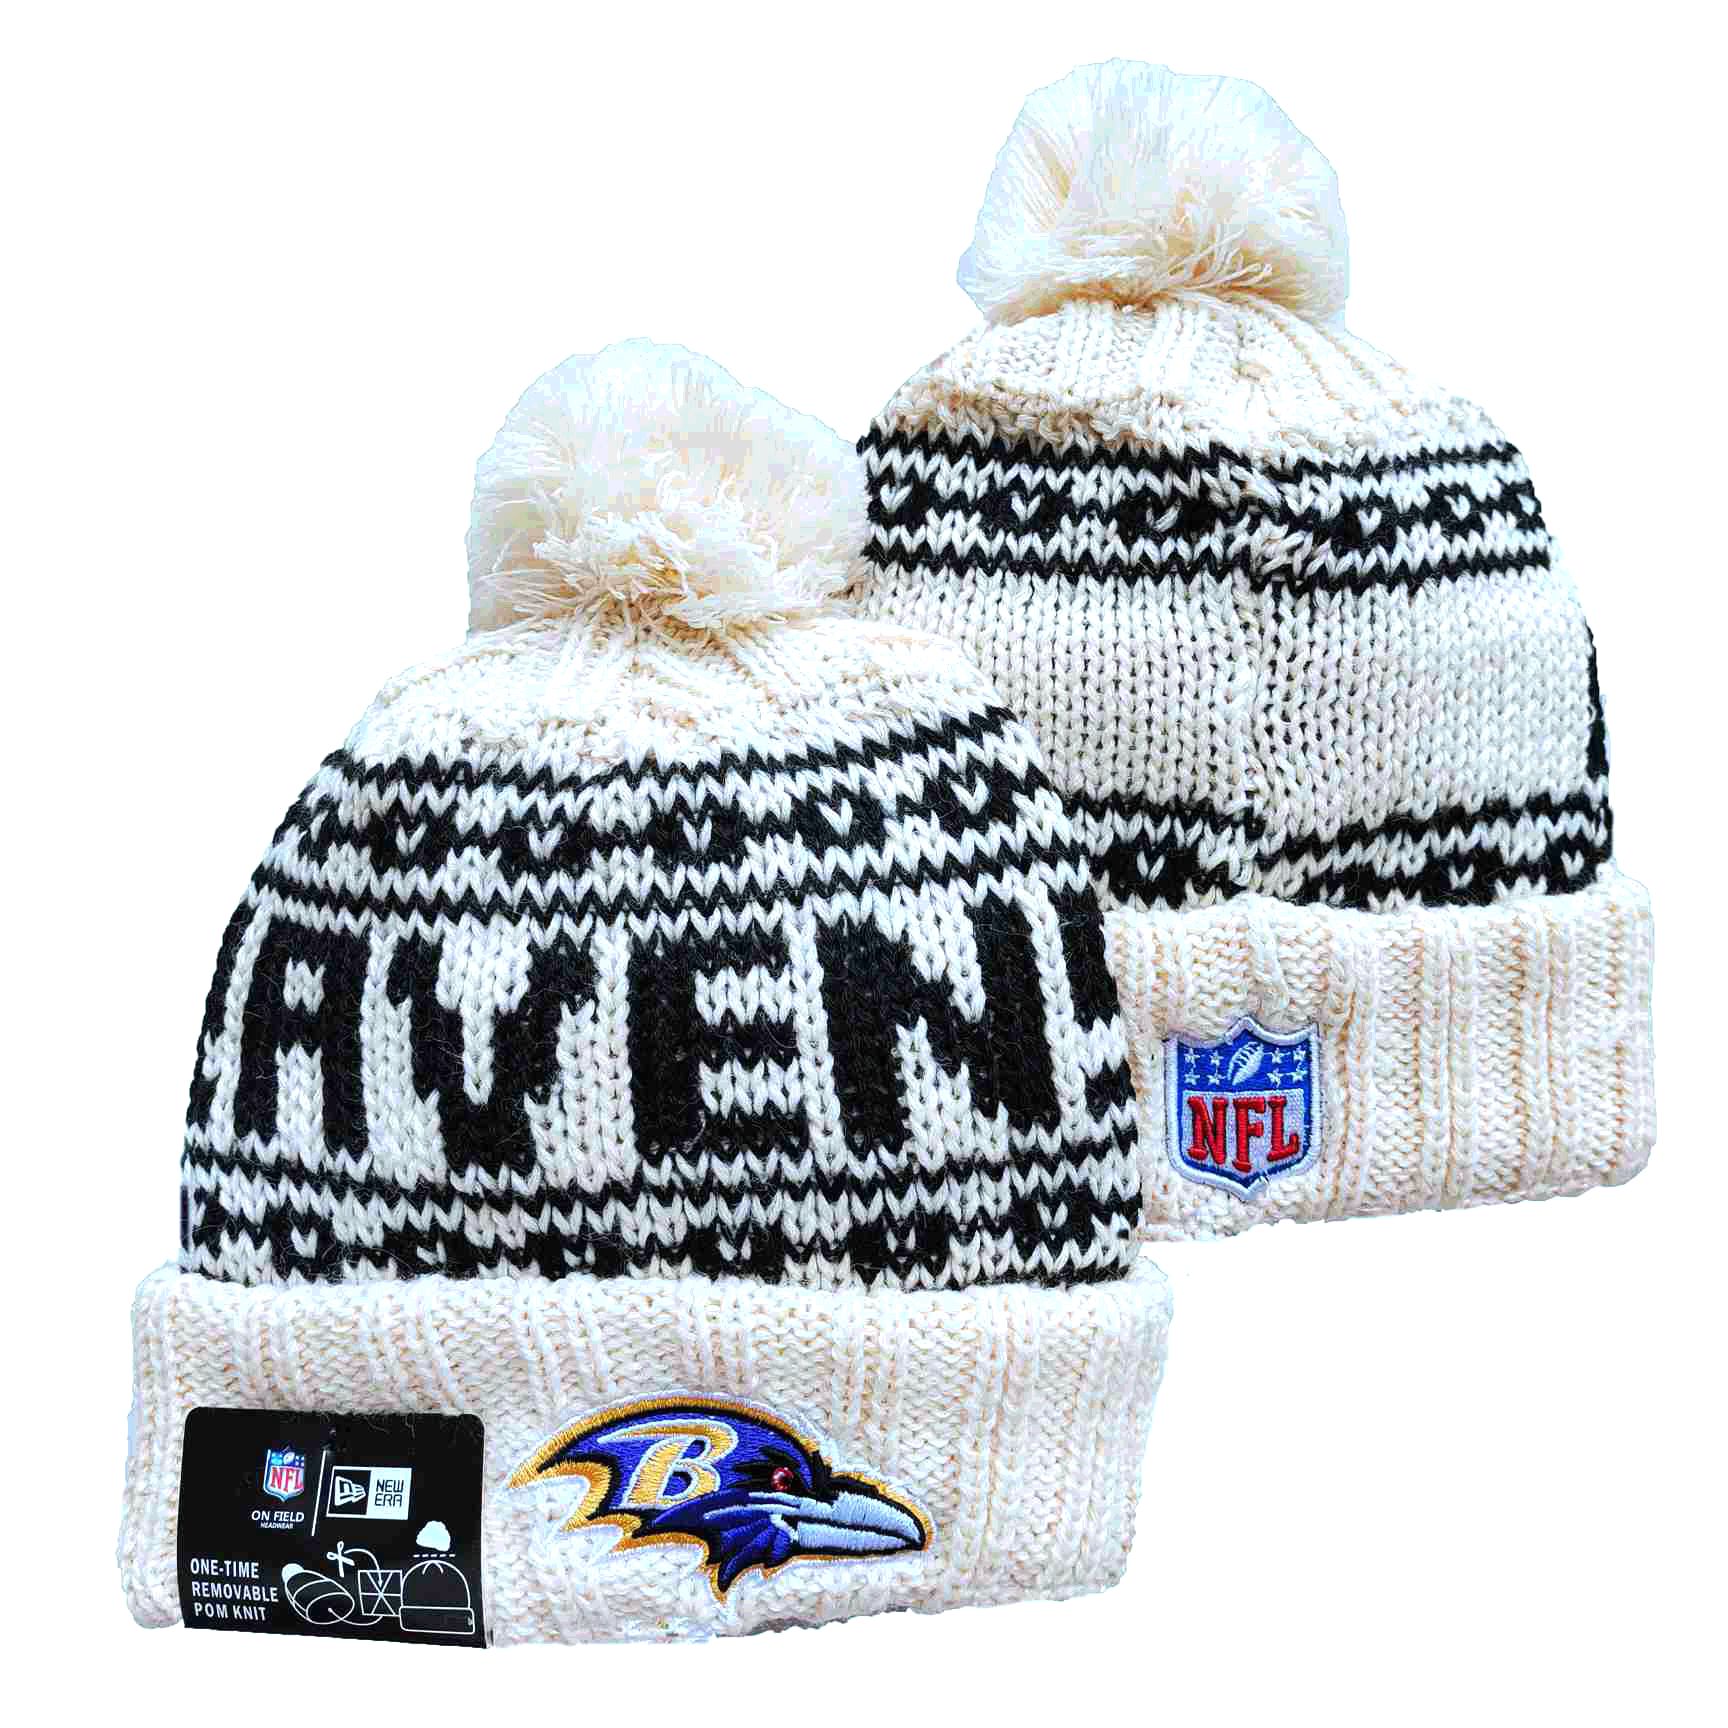 NFL Baltimore Ravens Beanies Knit Hats-YD1199